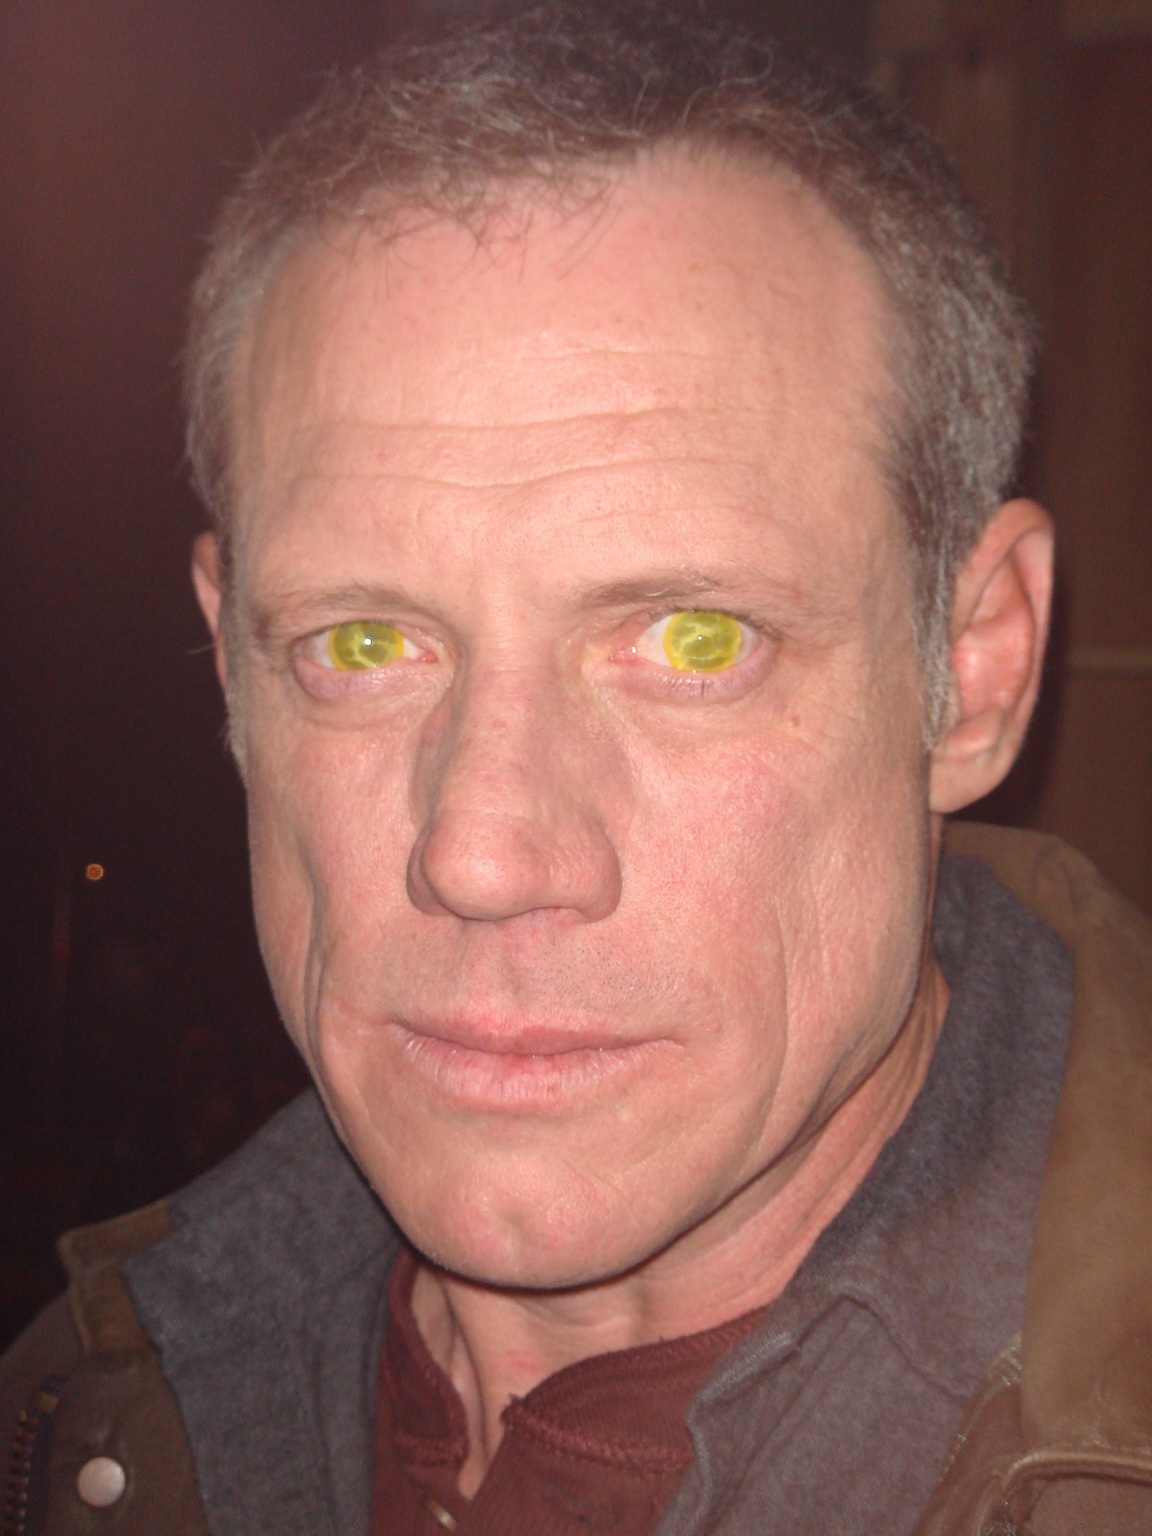 ...as the Yellow-Eyed Demon on Supernatural